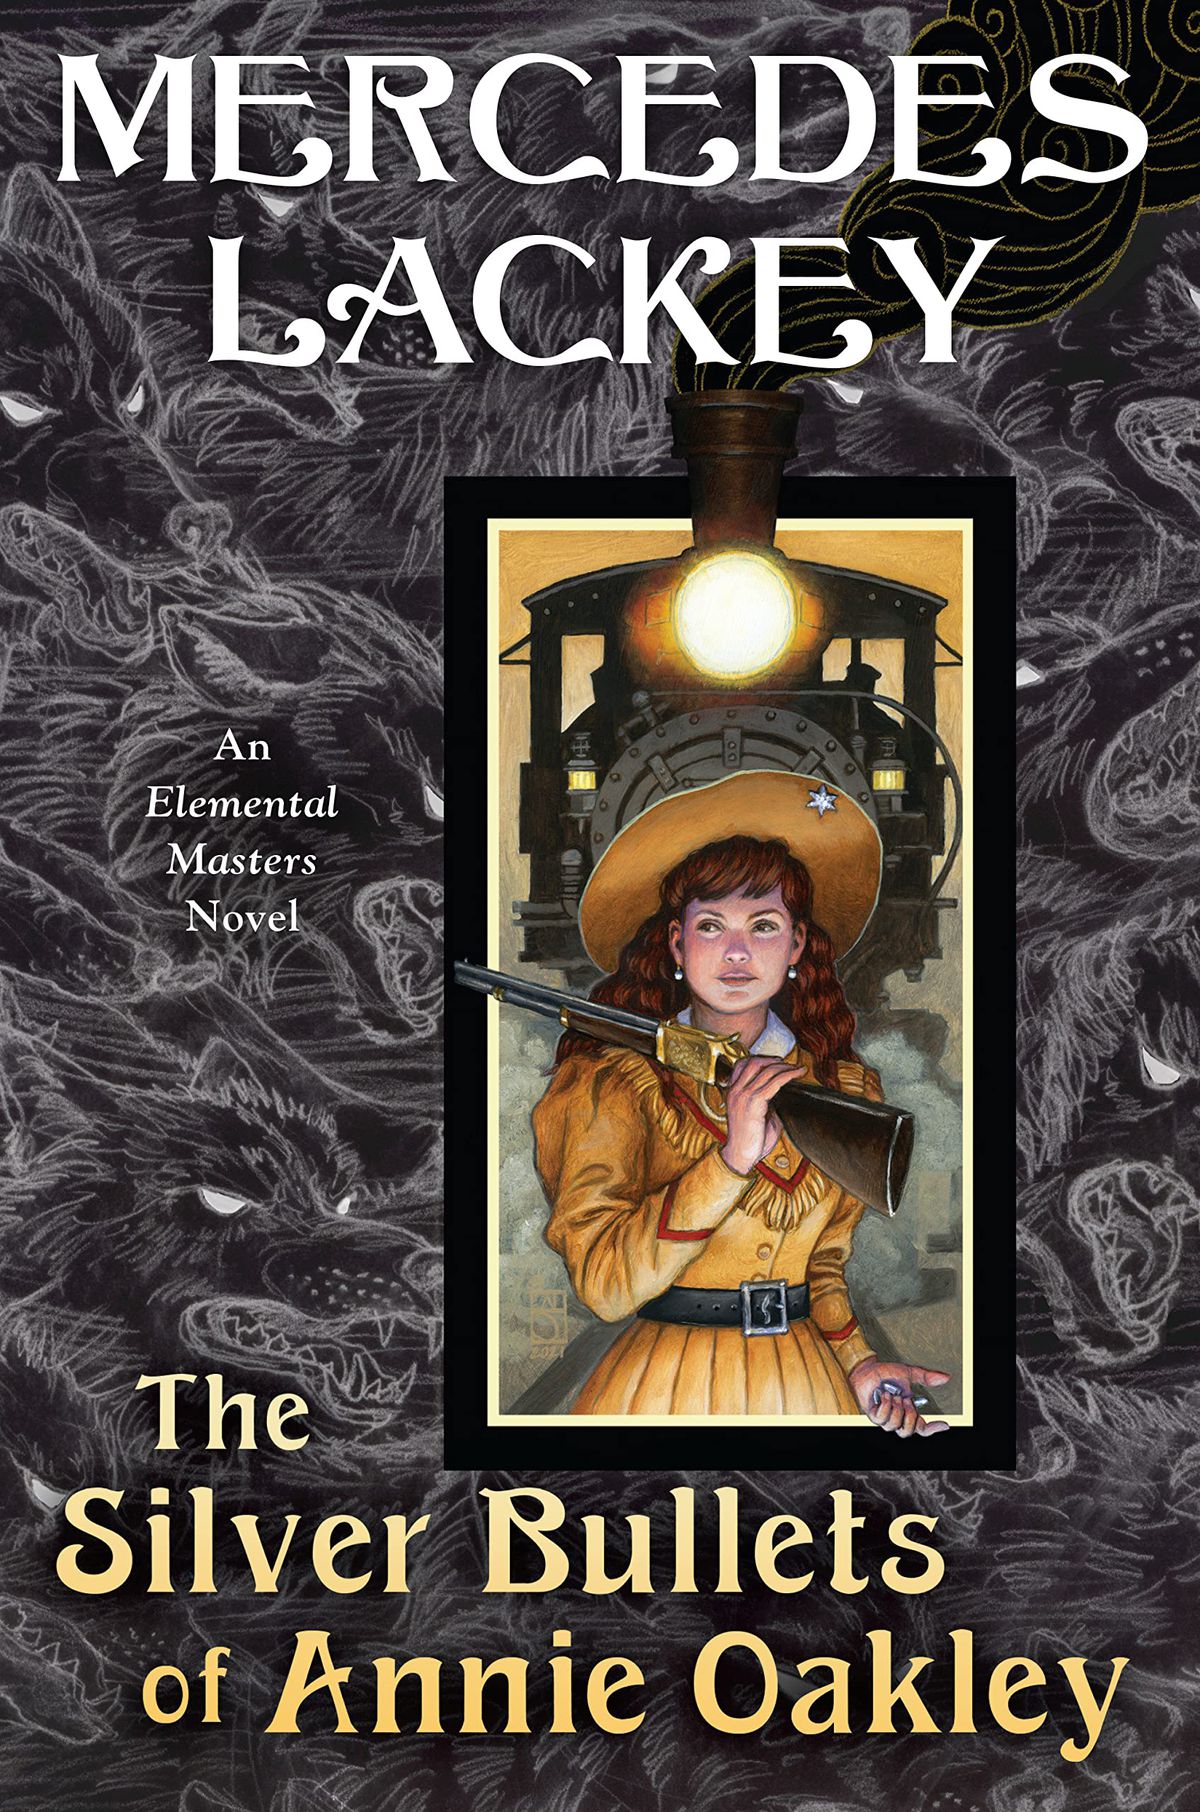 The cover for The Silver Bullets of Annie Oakley showing a woman in front of a train, and a black backdrop with white sketching on it